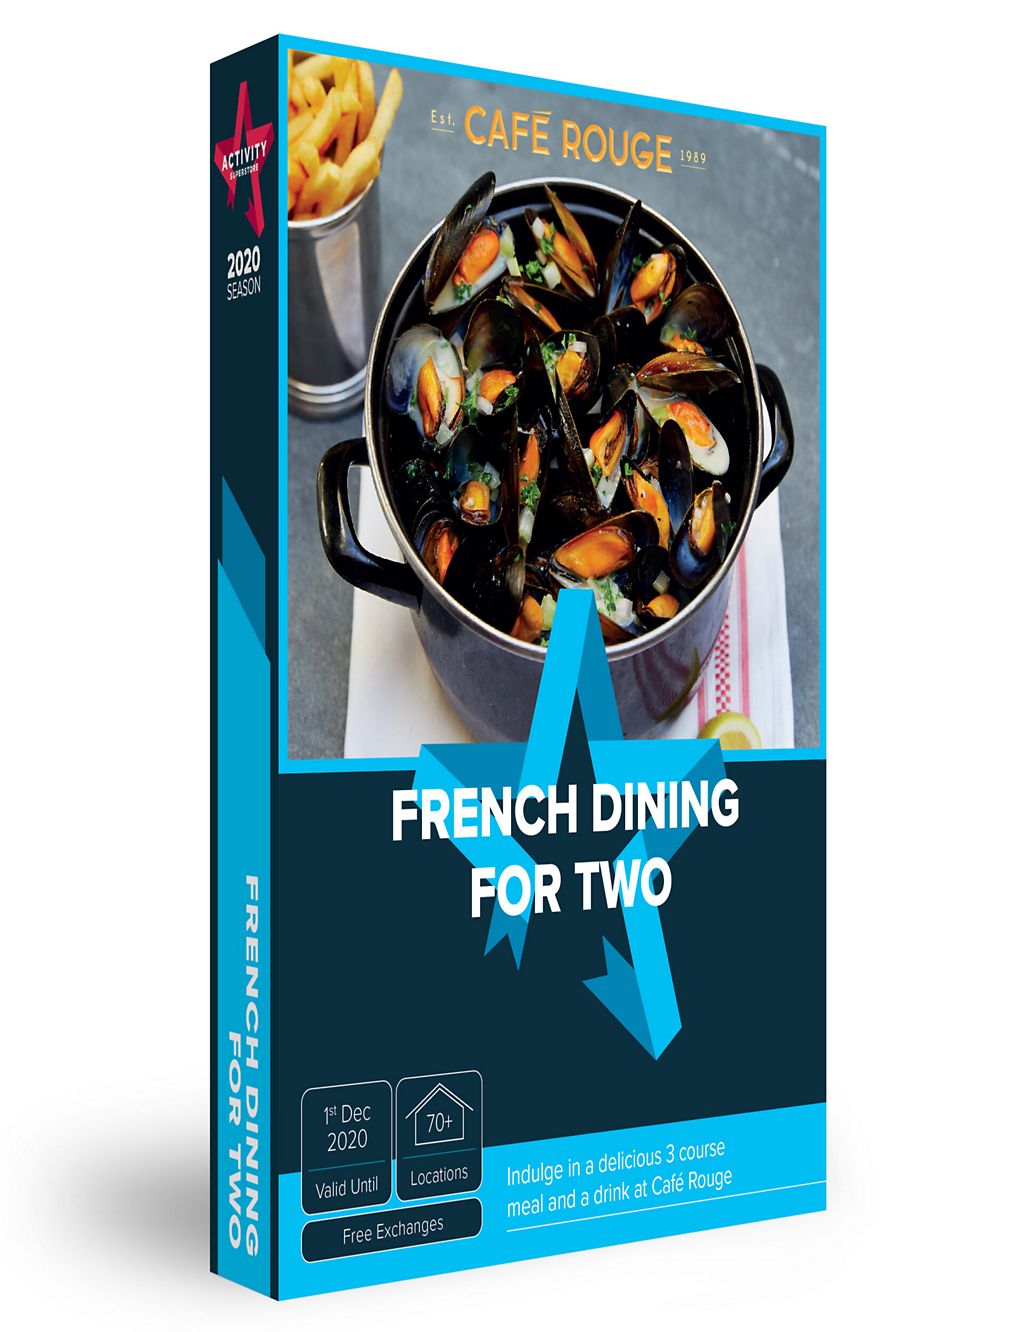 French Dining - Gift Experience Voucher 3 of 3